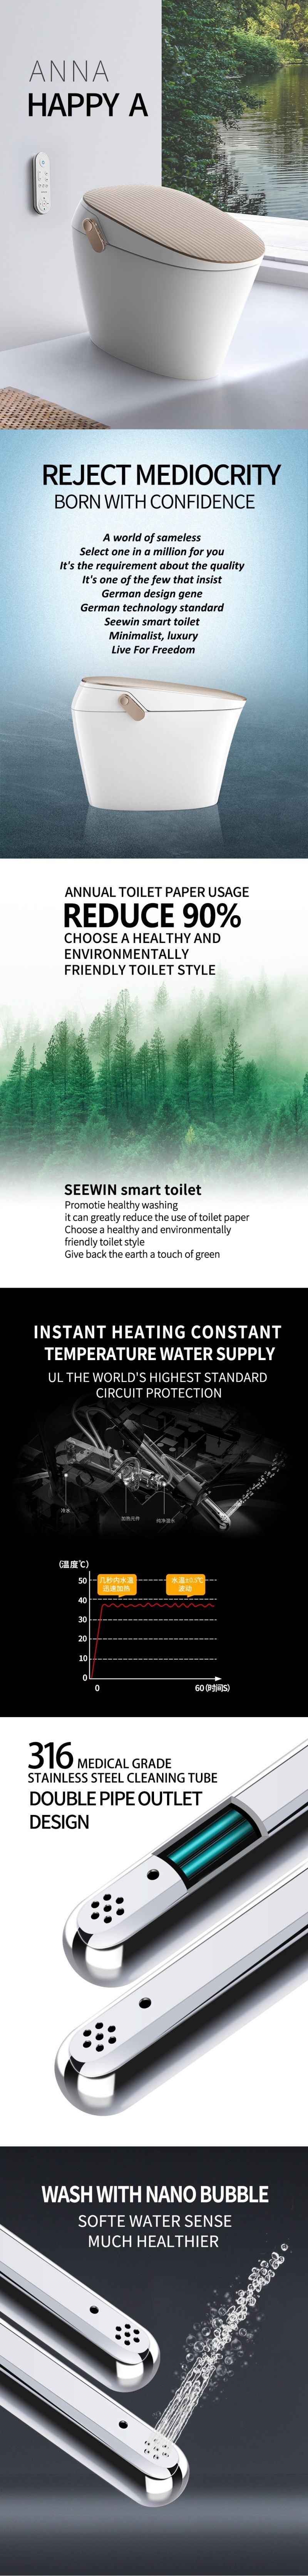 China Sanitary Instant Heating Automatic Inductive Smart Toilet